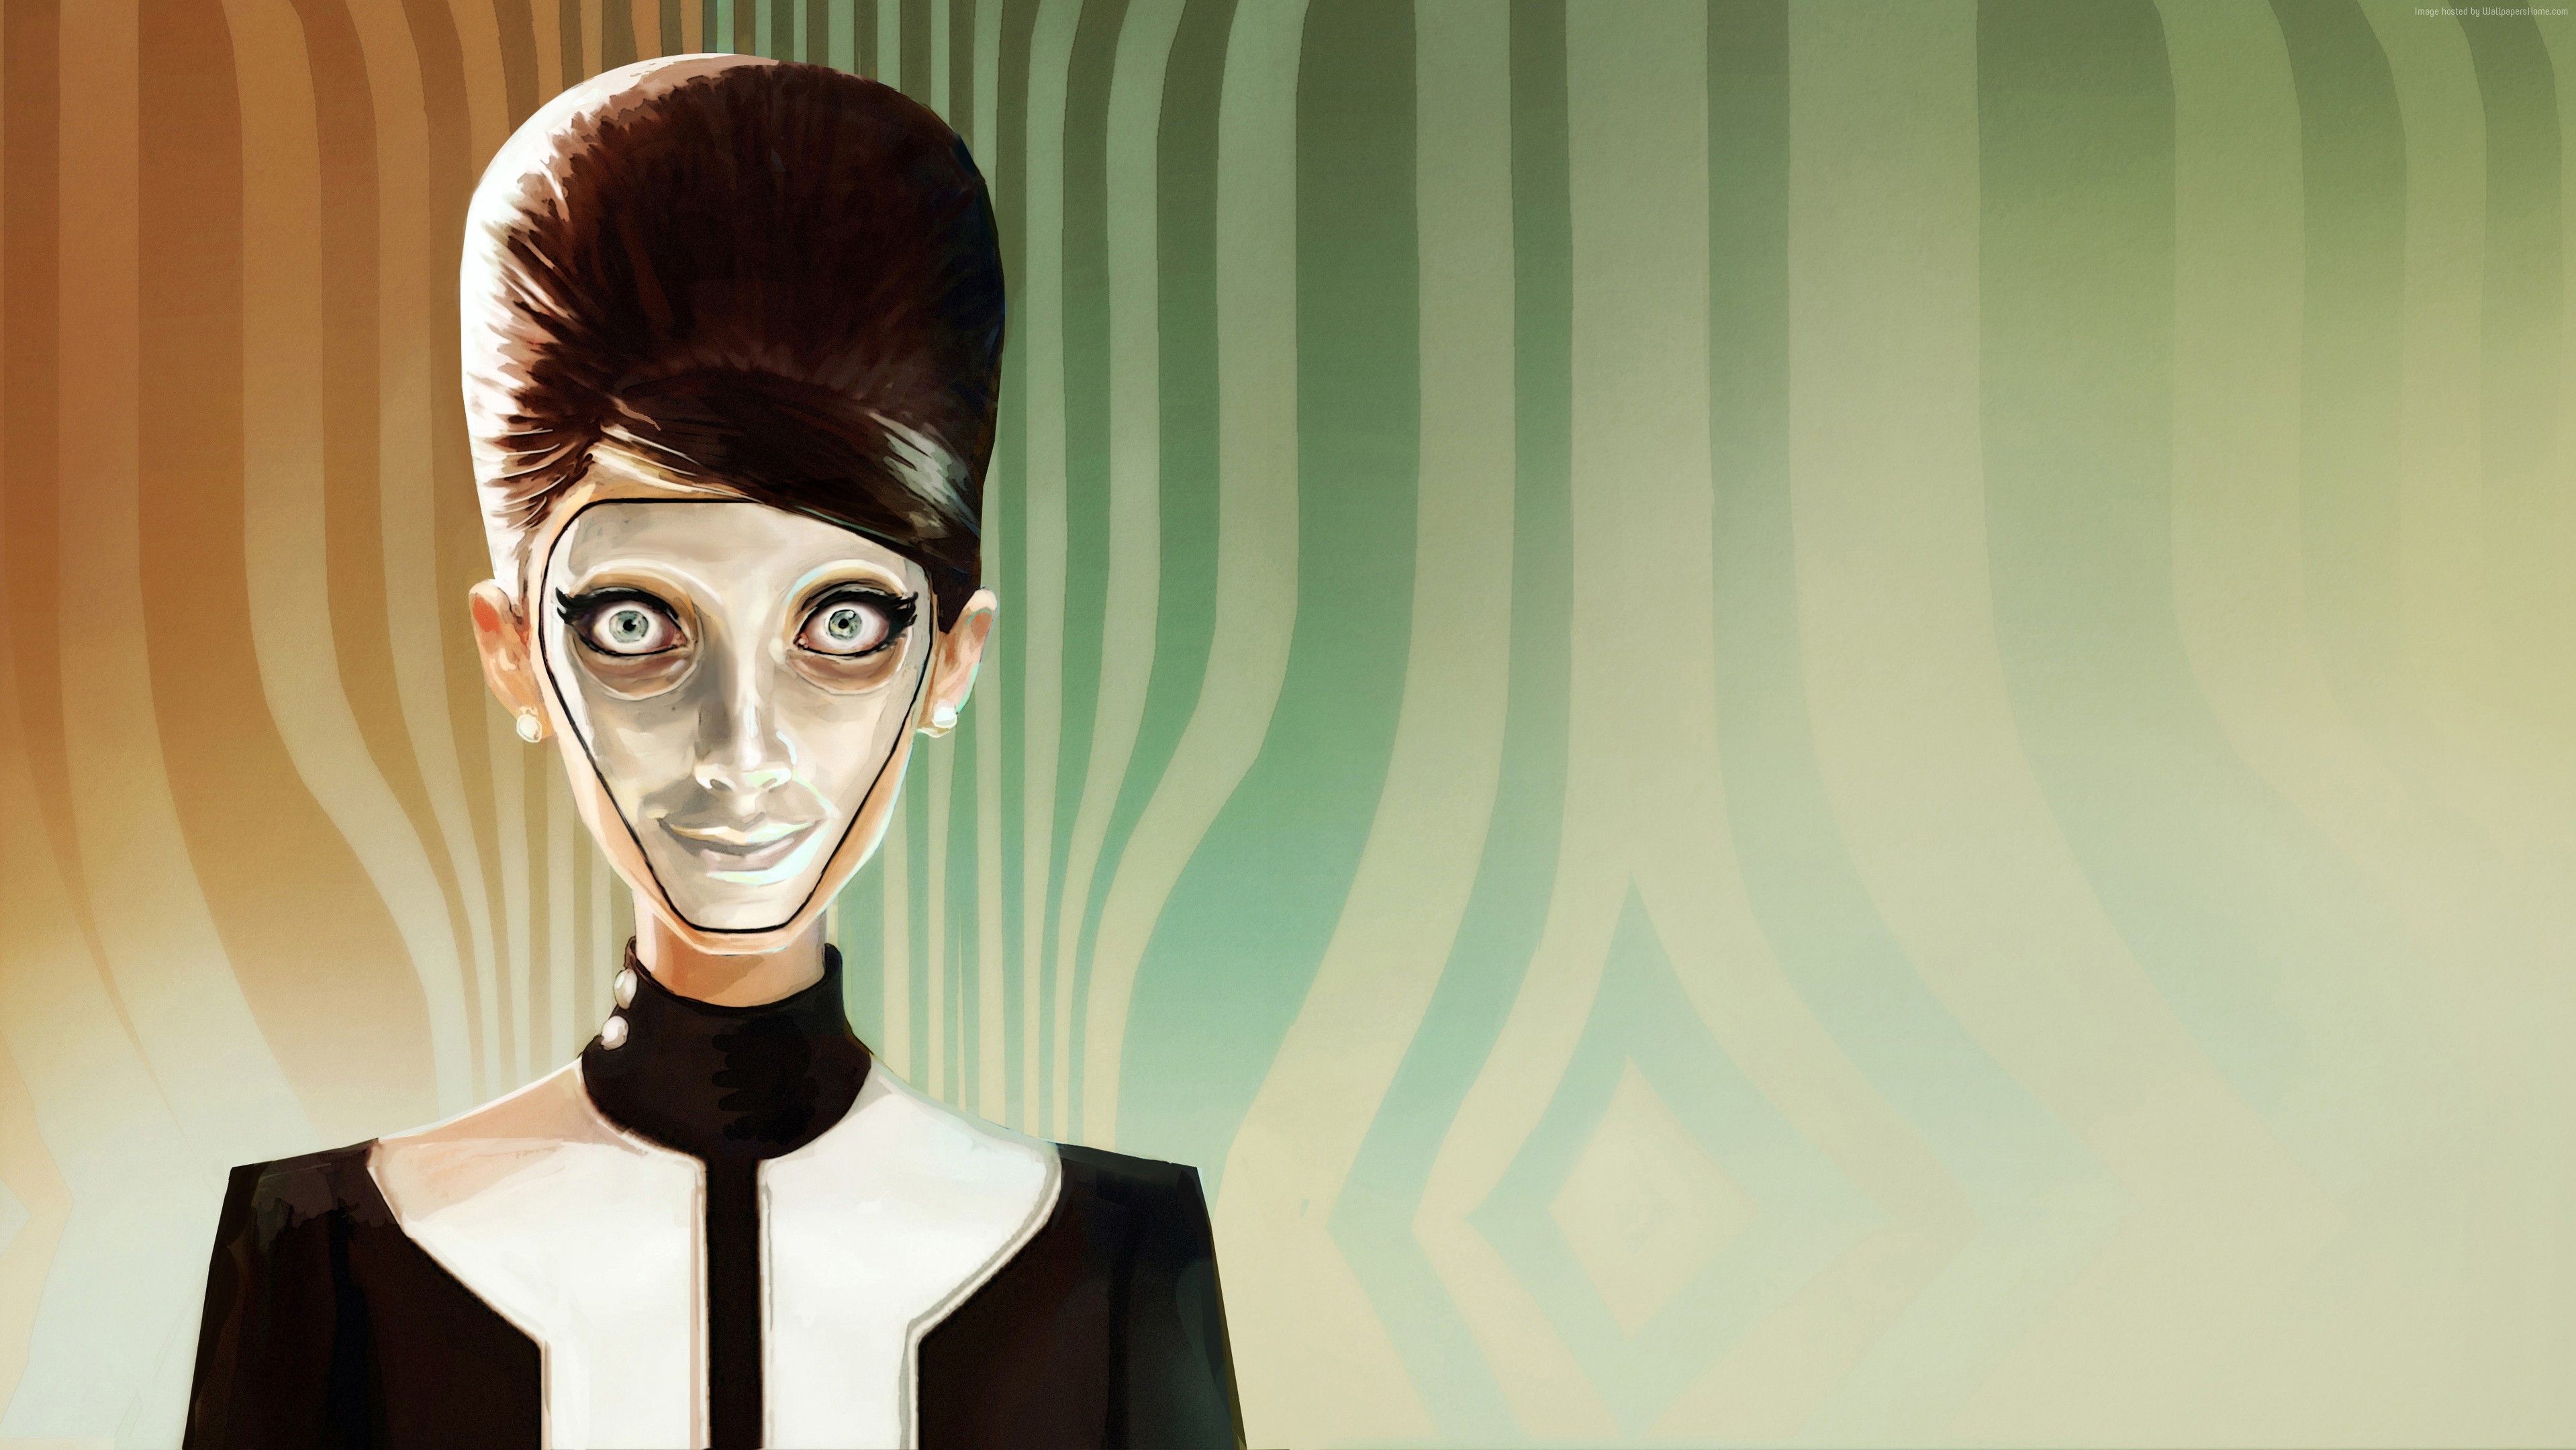 We Happy Few Wallpapers Video Game Hq We Happy Few Pictures 4k Wallpapers 2019